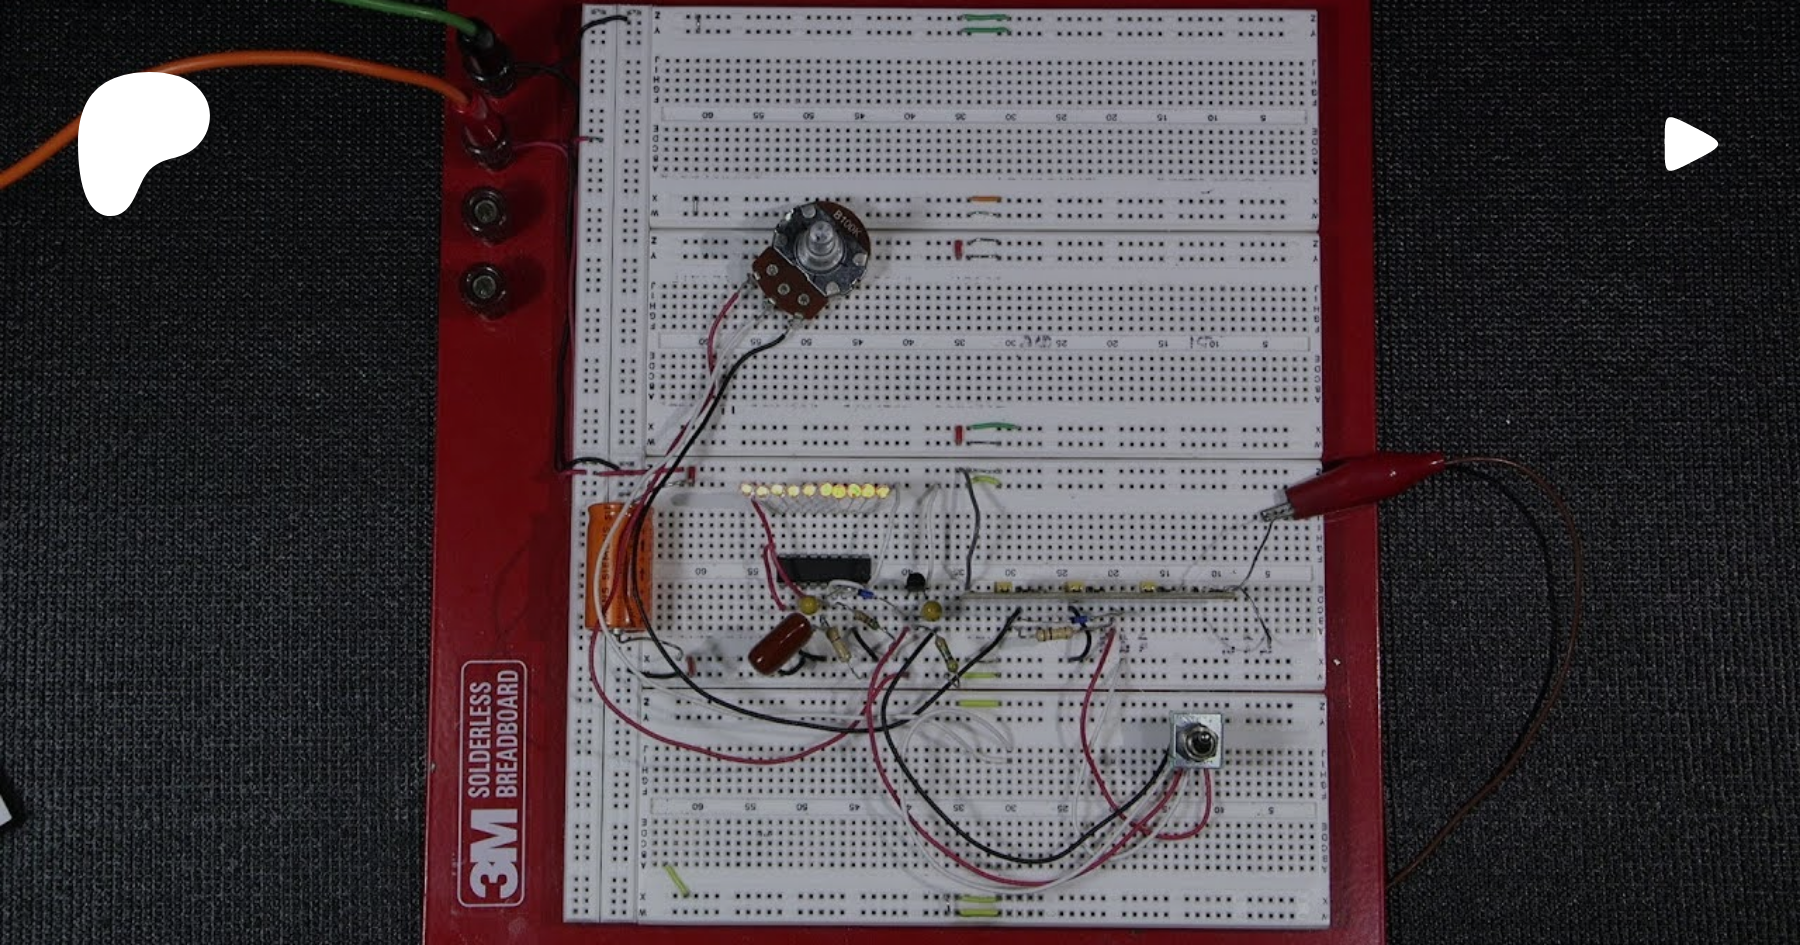 The New Sift Capacitor Tester Circuit